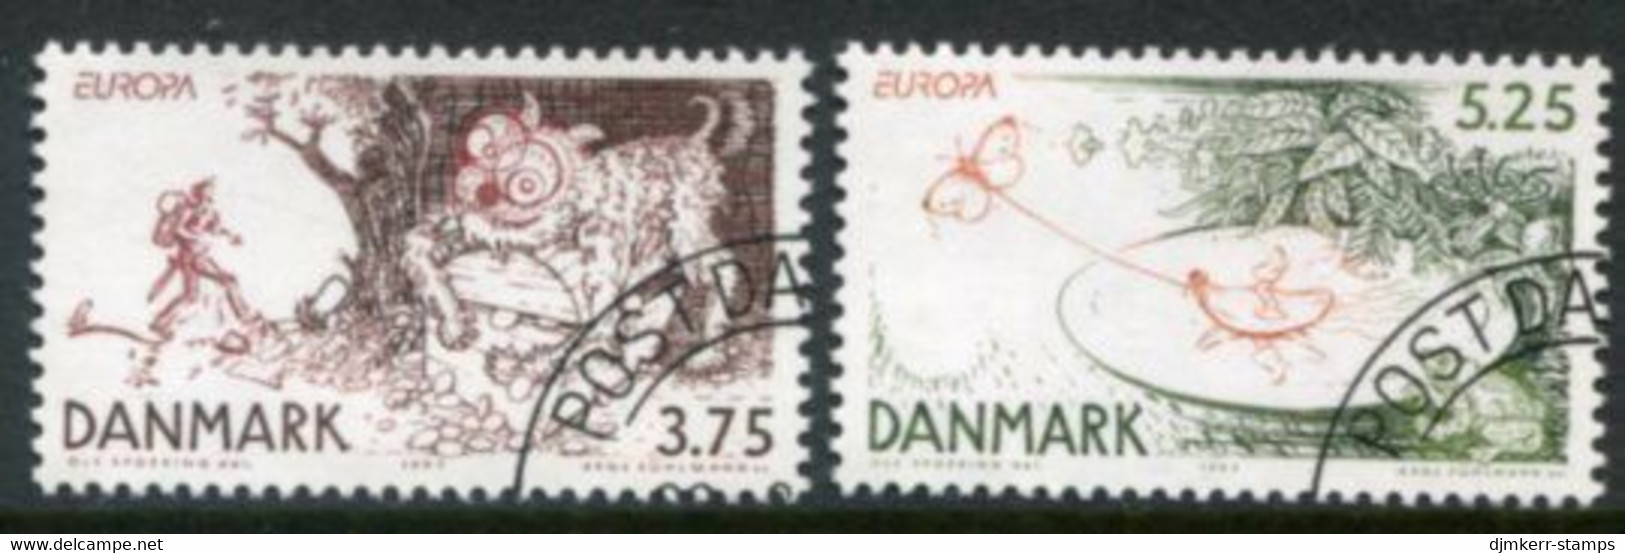 DENMARK 1997 Europa: Sagas And Legends Used.  Michel 1162-63 - Used Stamps